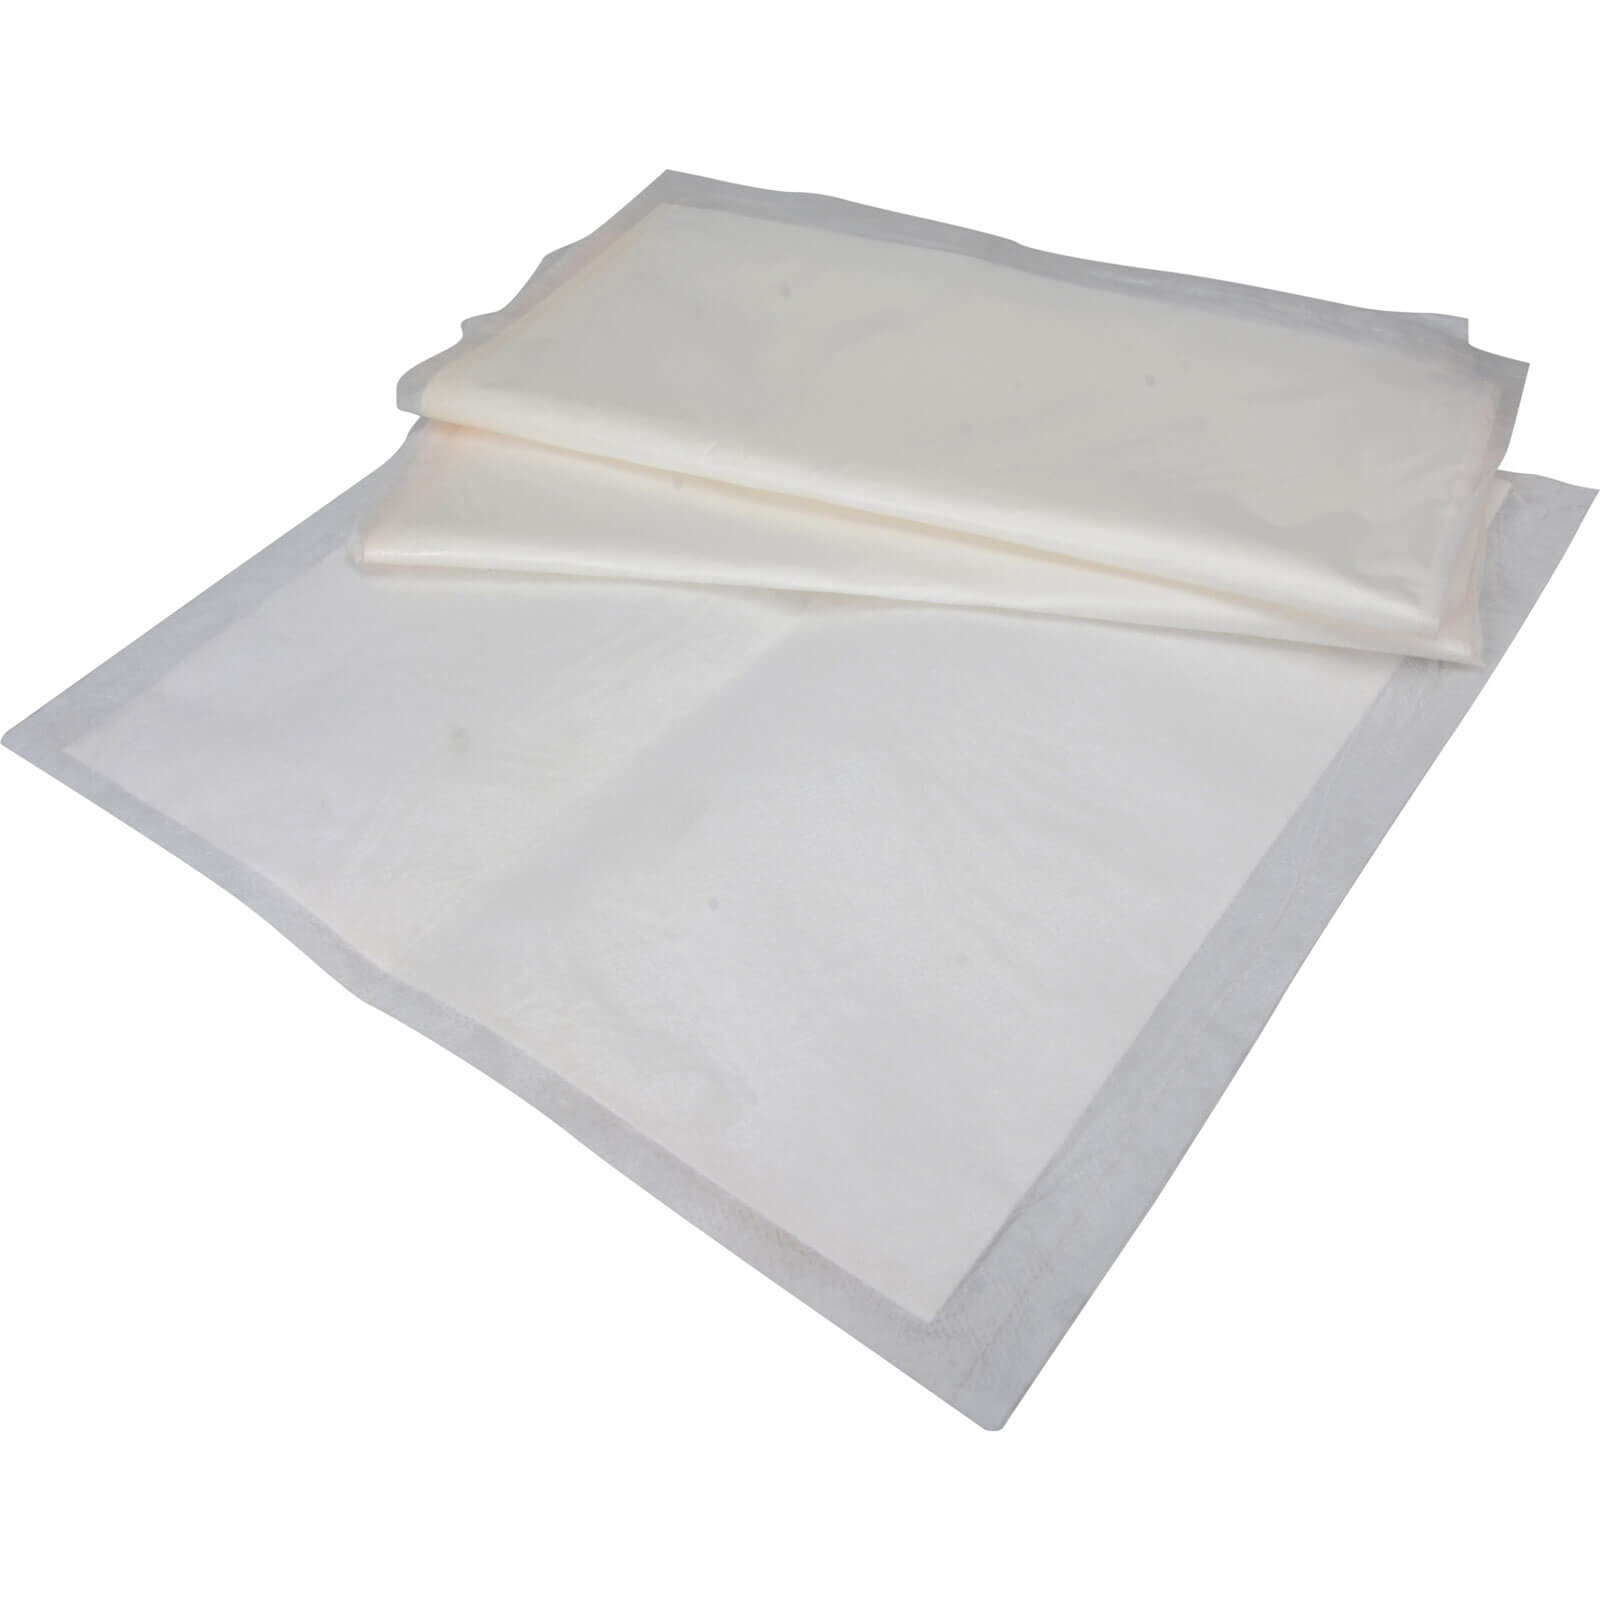 Image of Monument 2951Y Mopitup Super Absorbent Sheets Pack of 3